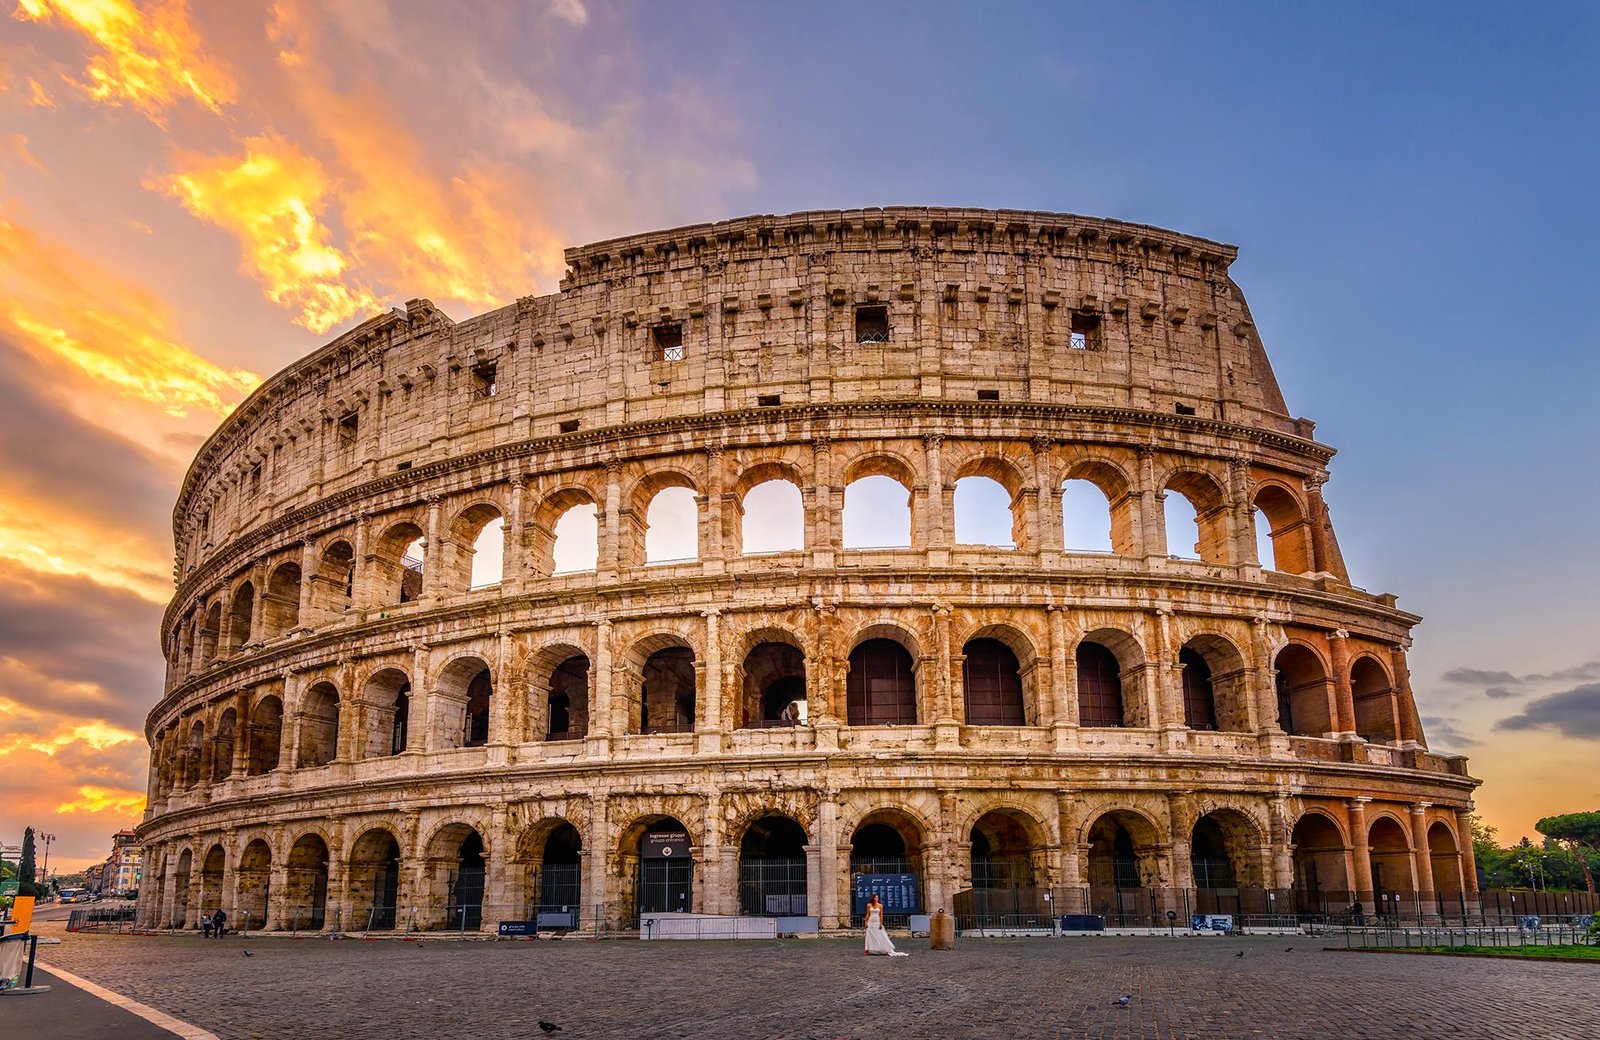 GREAT COLOSSEUM IN ROME